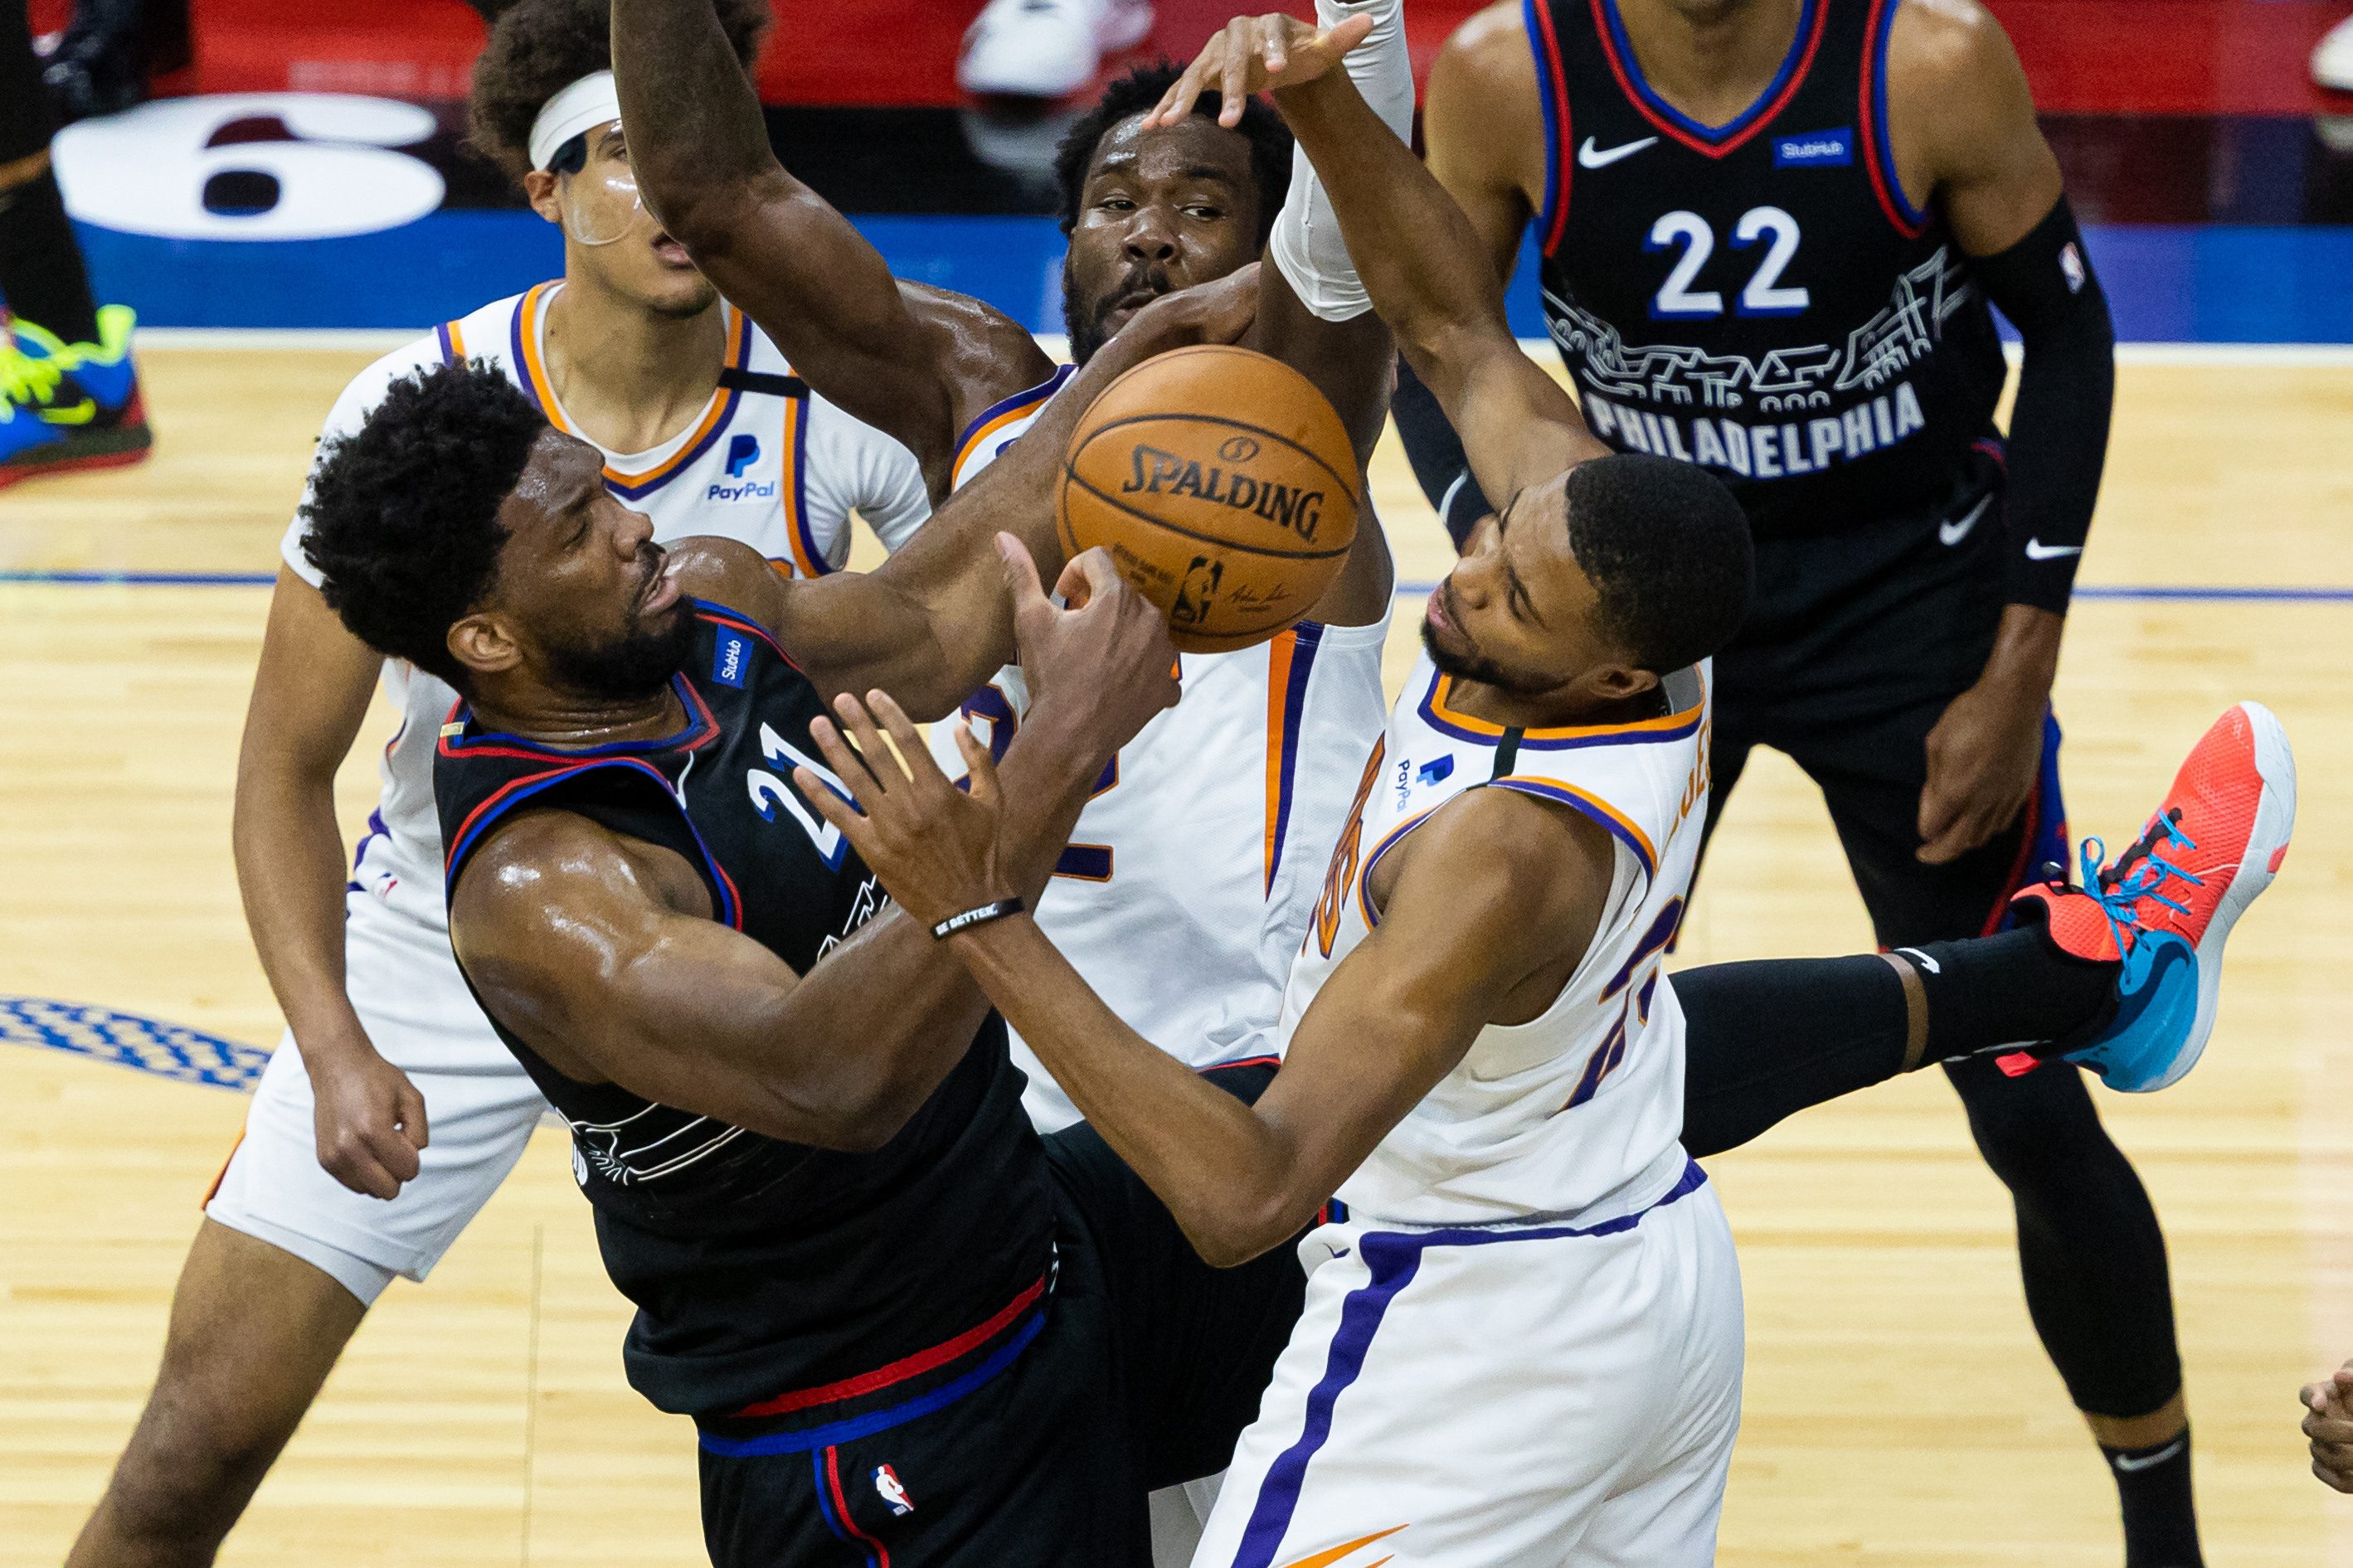 Suns escape Sixers as Embiid buzzer-beater narrowly misses